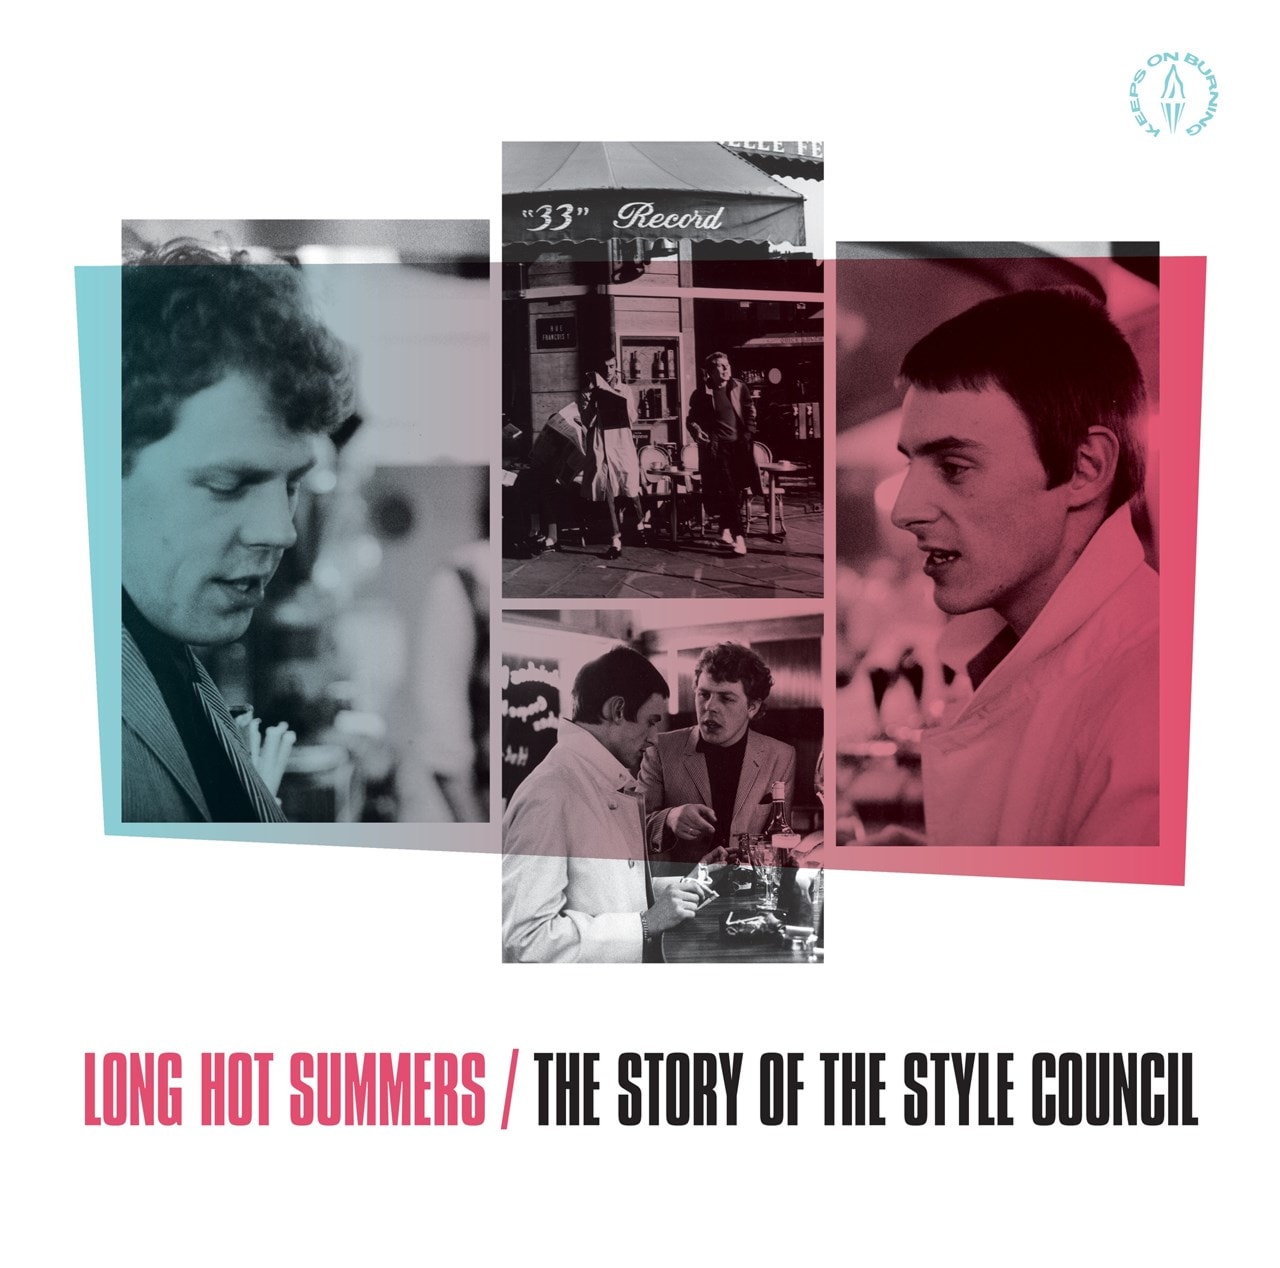 the style council album covers